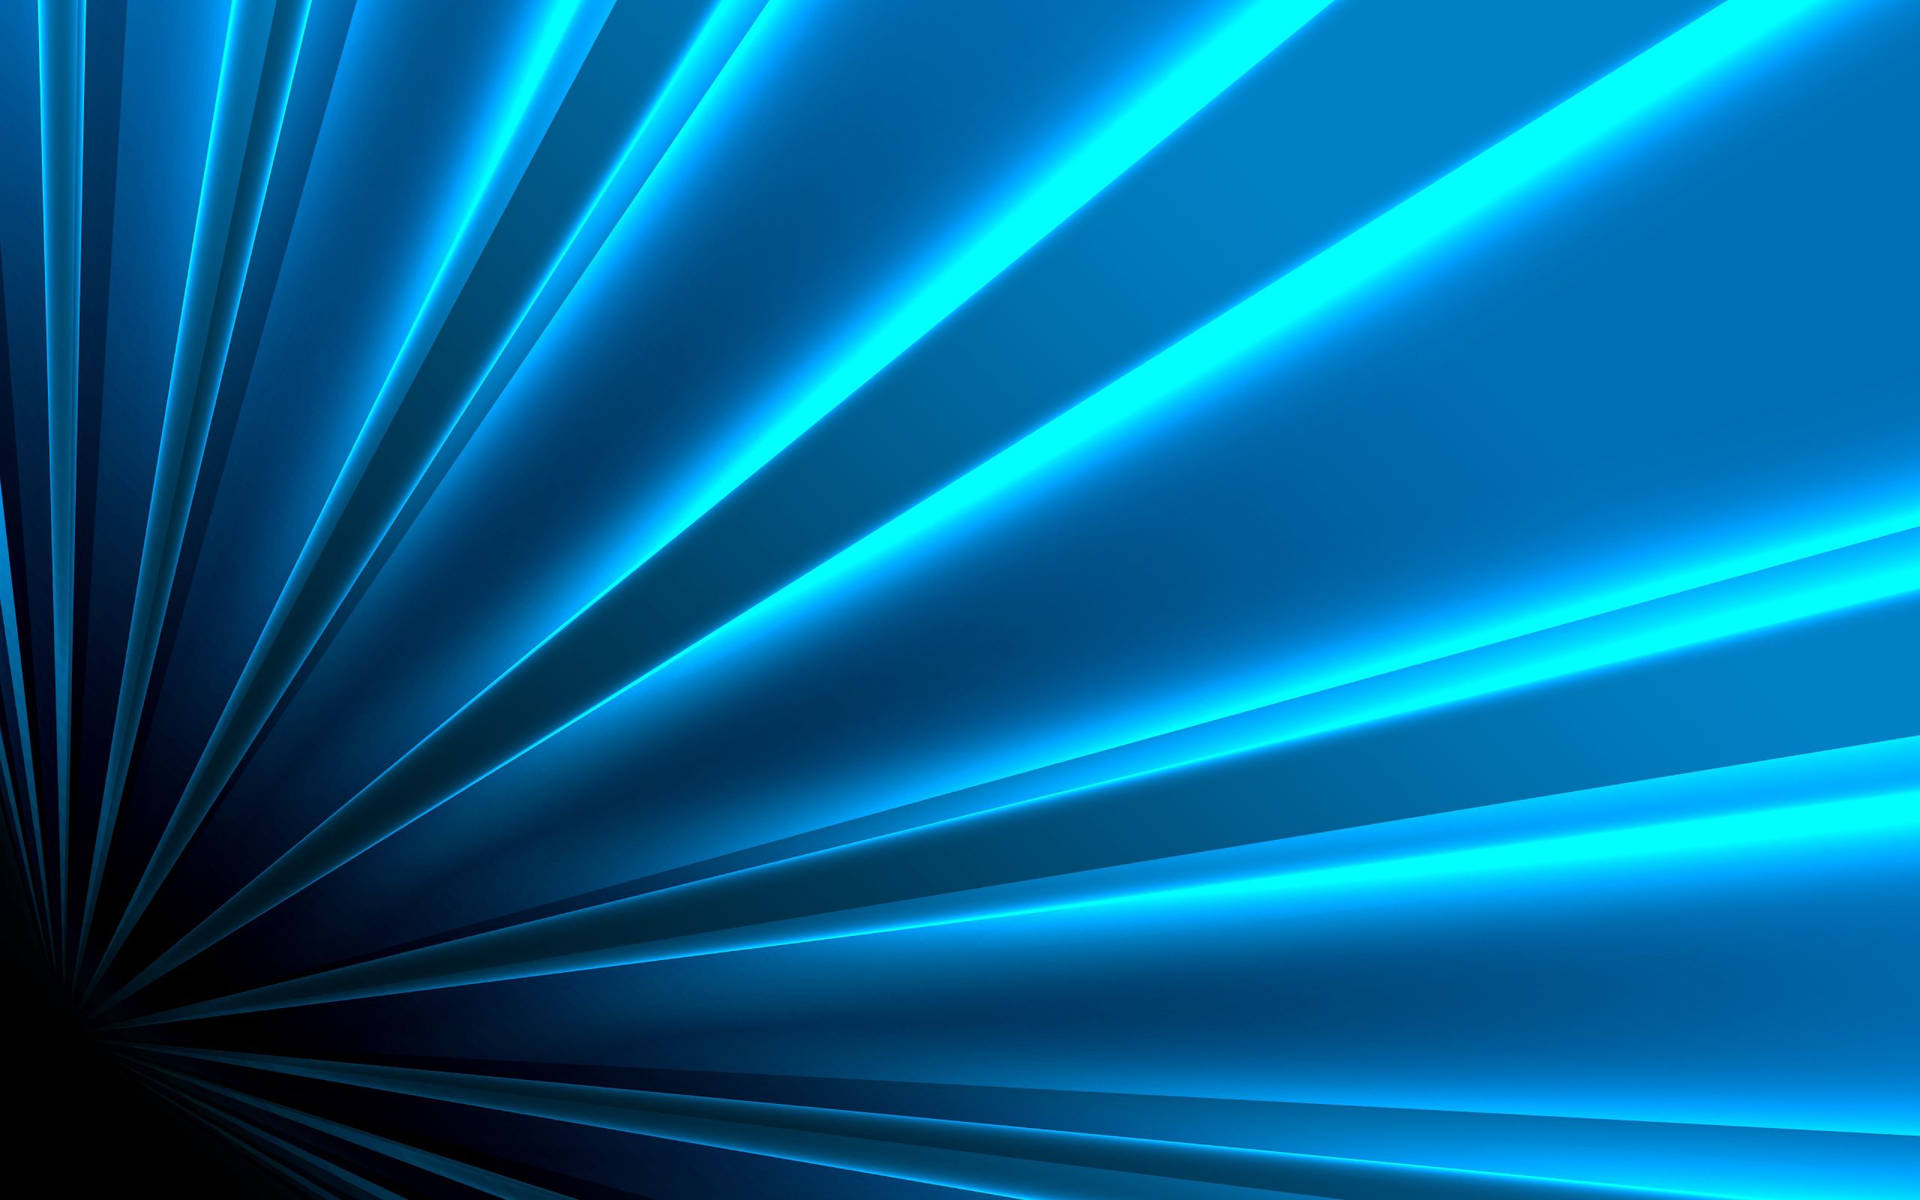 Blue Lines And Glowing Light